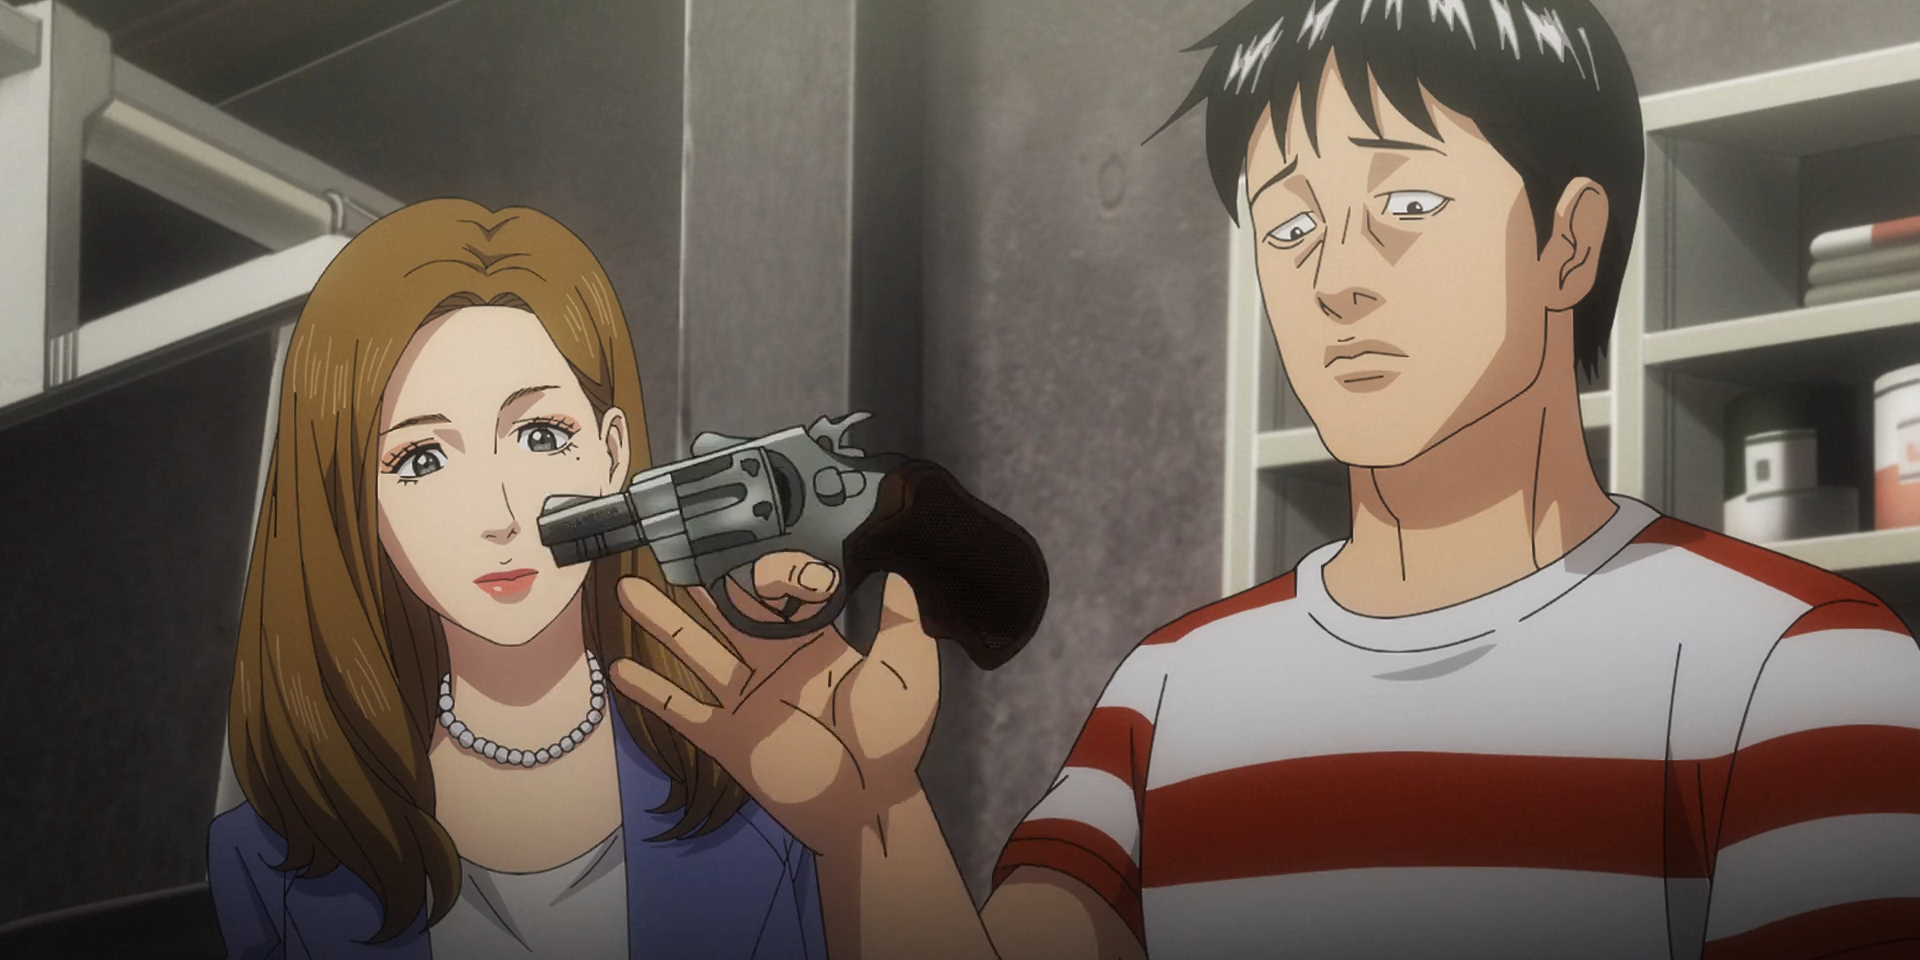 Akira Sato, disguised in a red and white shirt, attempts to spin a snub-nosed revolver, while his fake sister, Yoko, watches from behind.